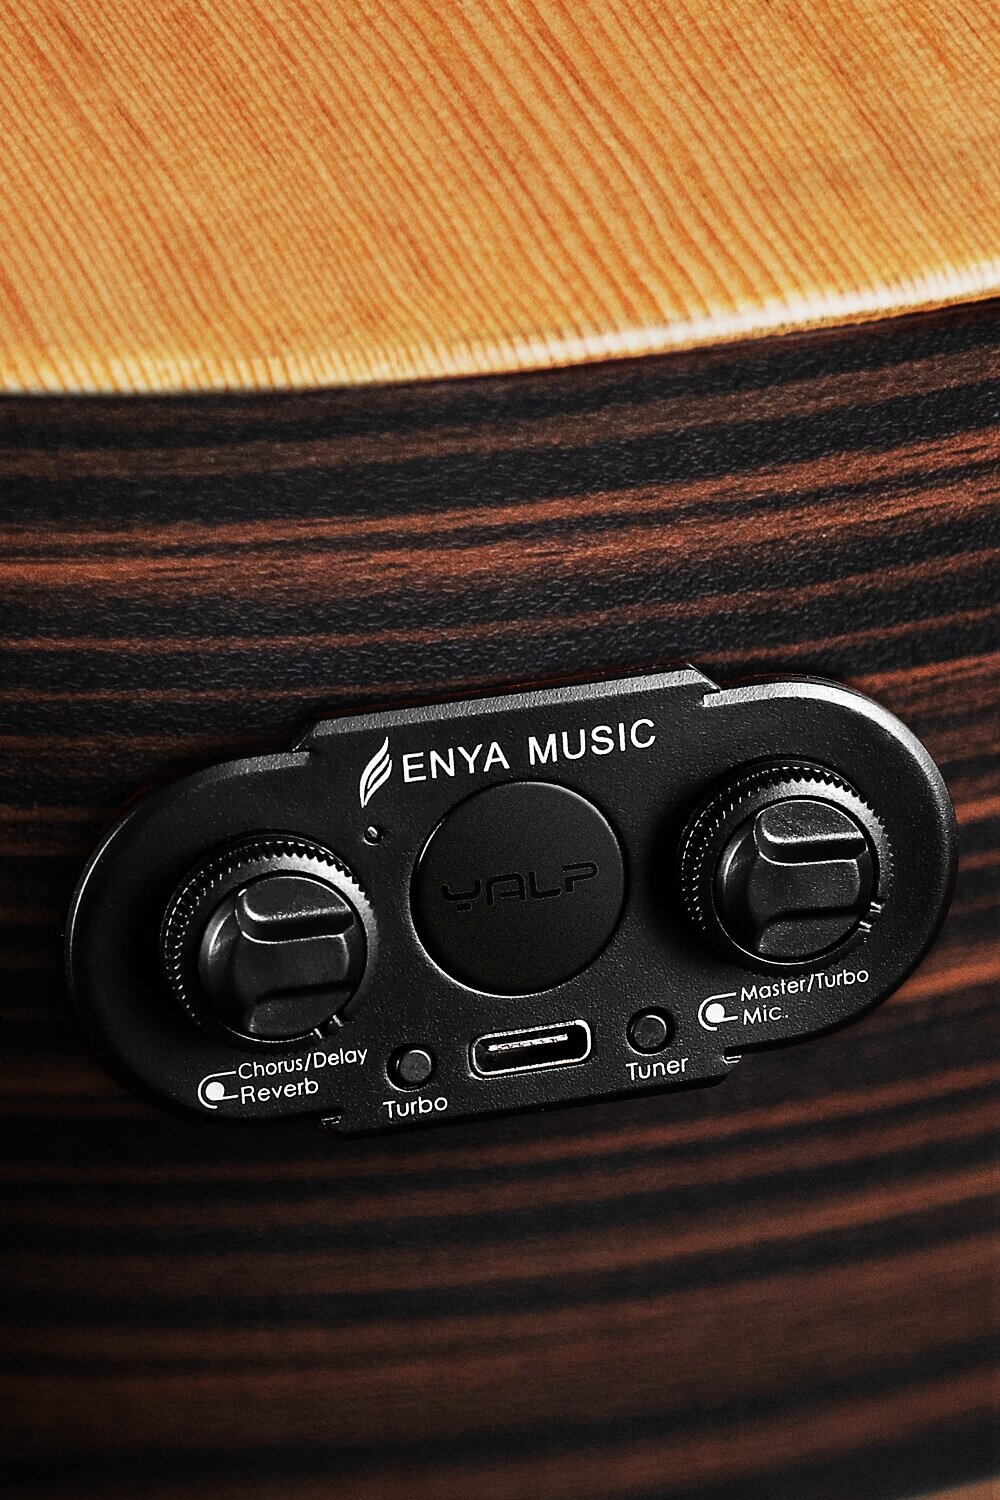 Custom pickup system - The EQ version of X1 Pro is equipped with the dual-mode (piezoelectric + microphone) TransAcoustic pickup jointly developed by Enya and Double Acoustics, S0 model, and comes with a tuning meter and power display function.Adapt to your multiple performance needs!